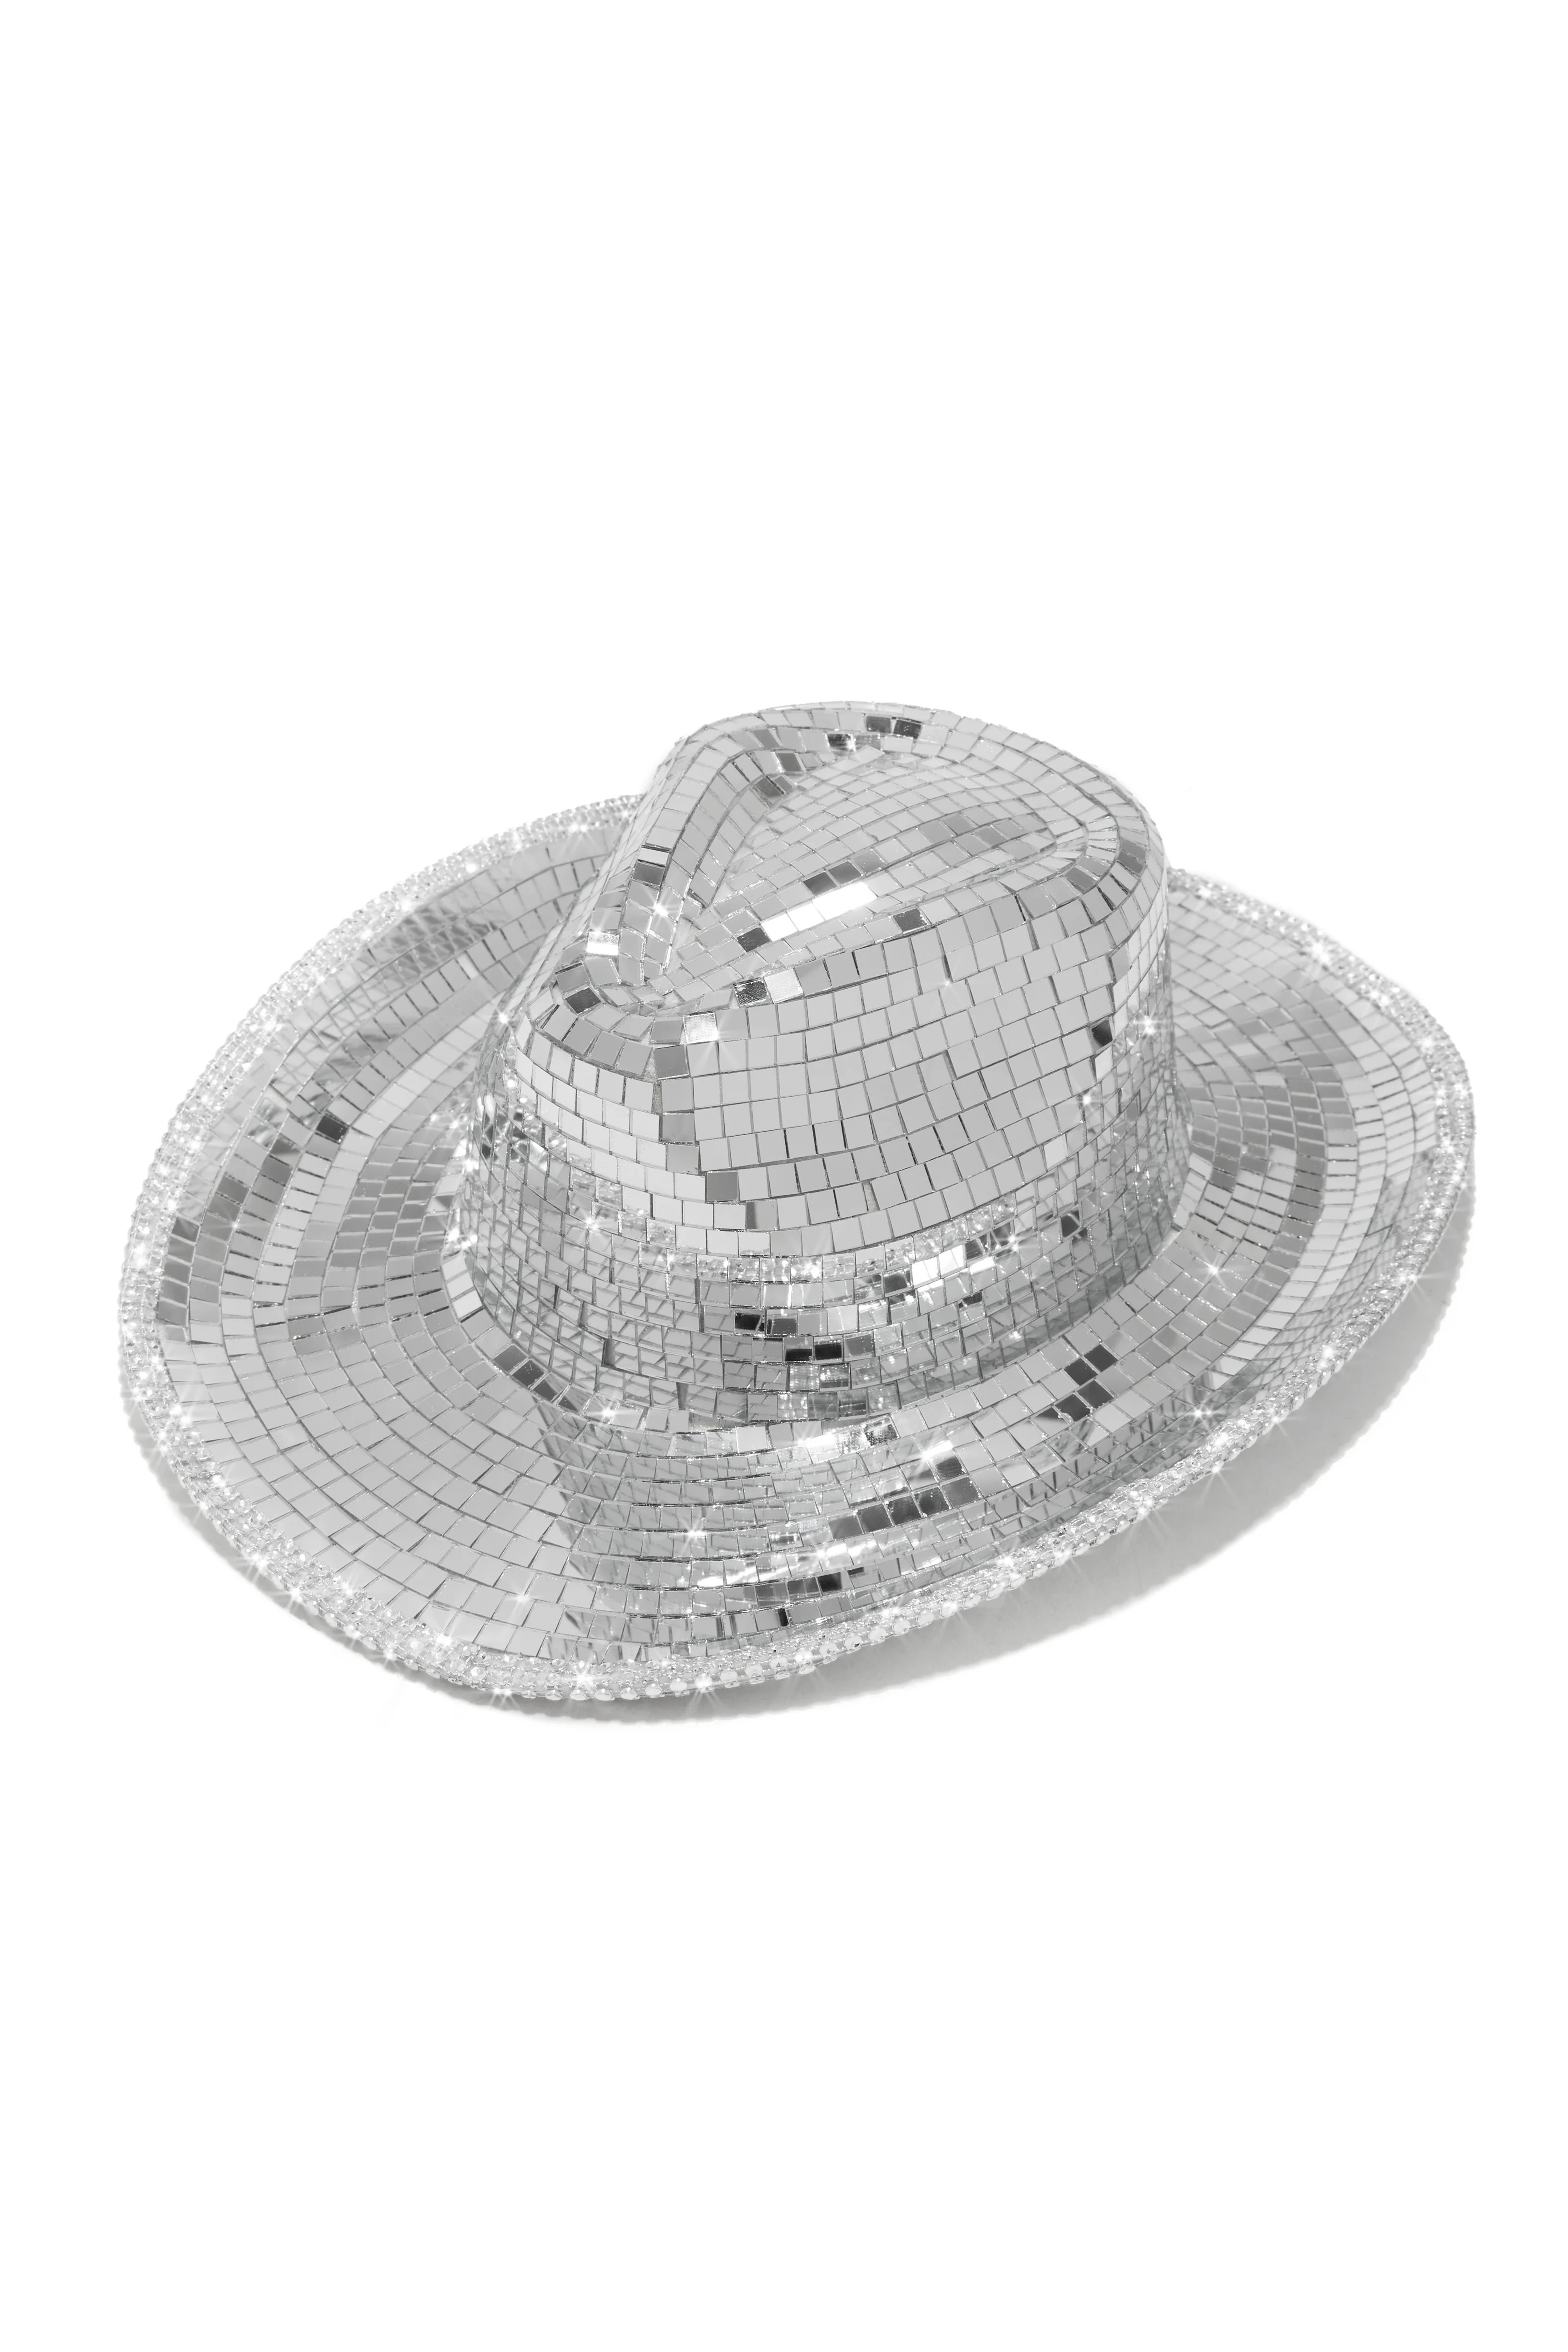 Miss Lola | That Girl Silver Embellished Disco Cowgirl Hat | MISS LOLA